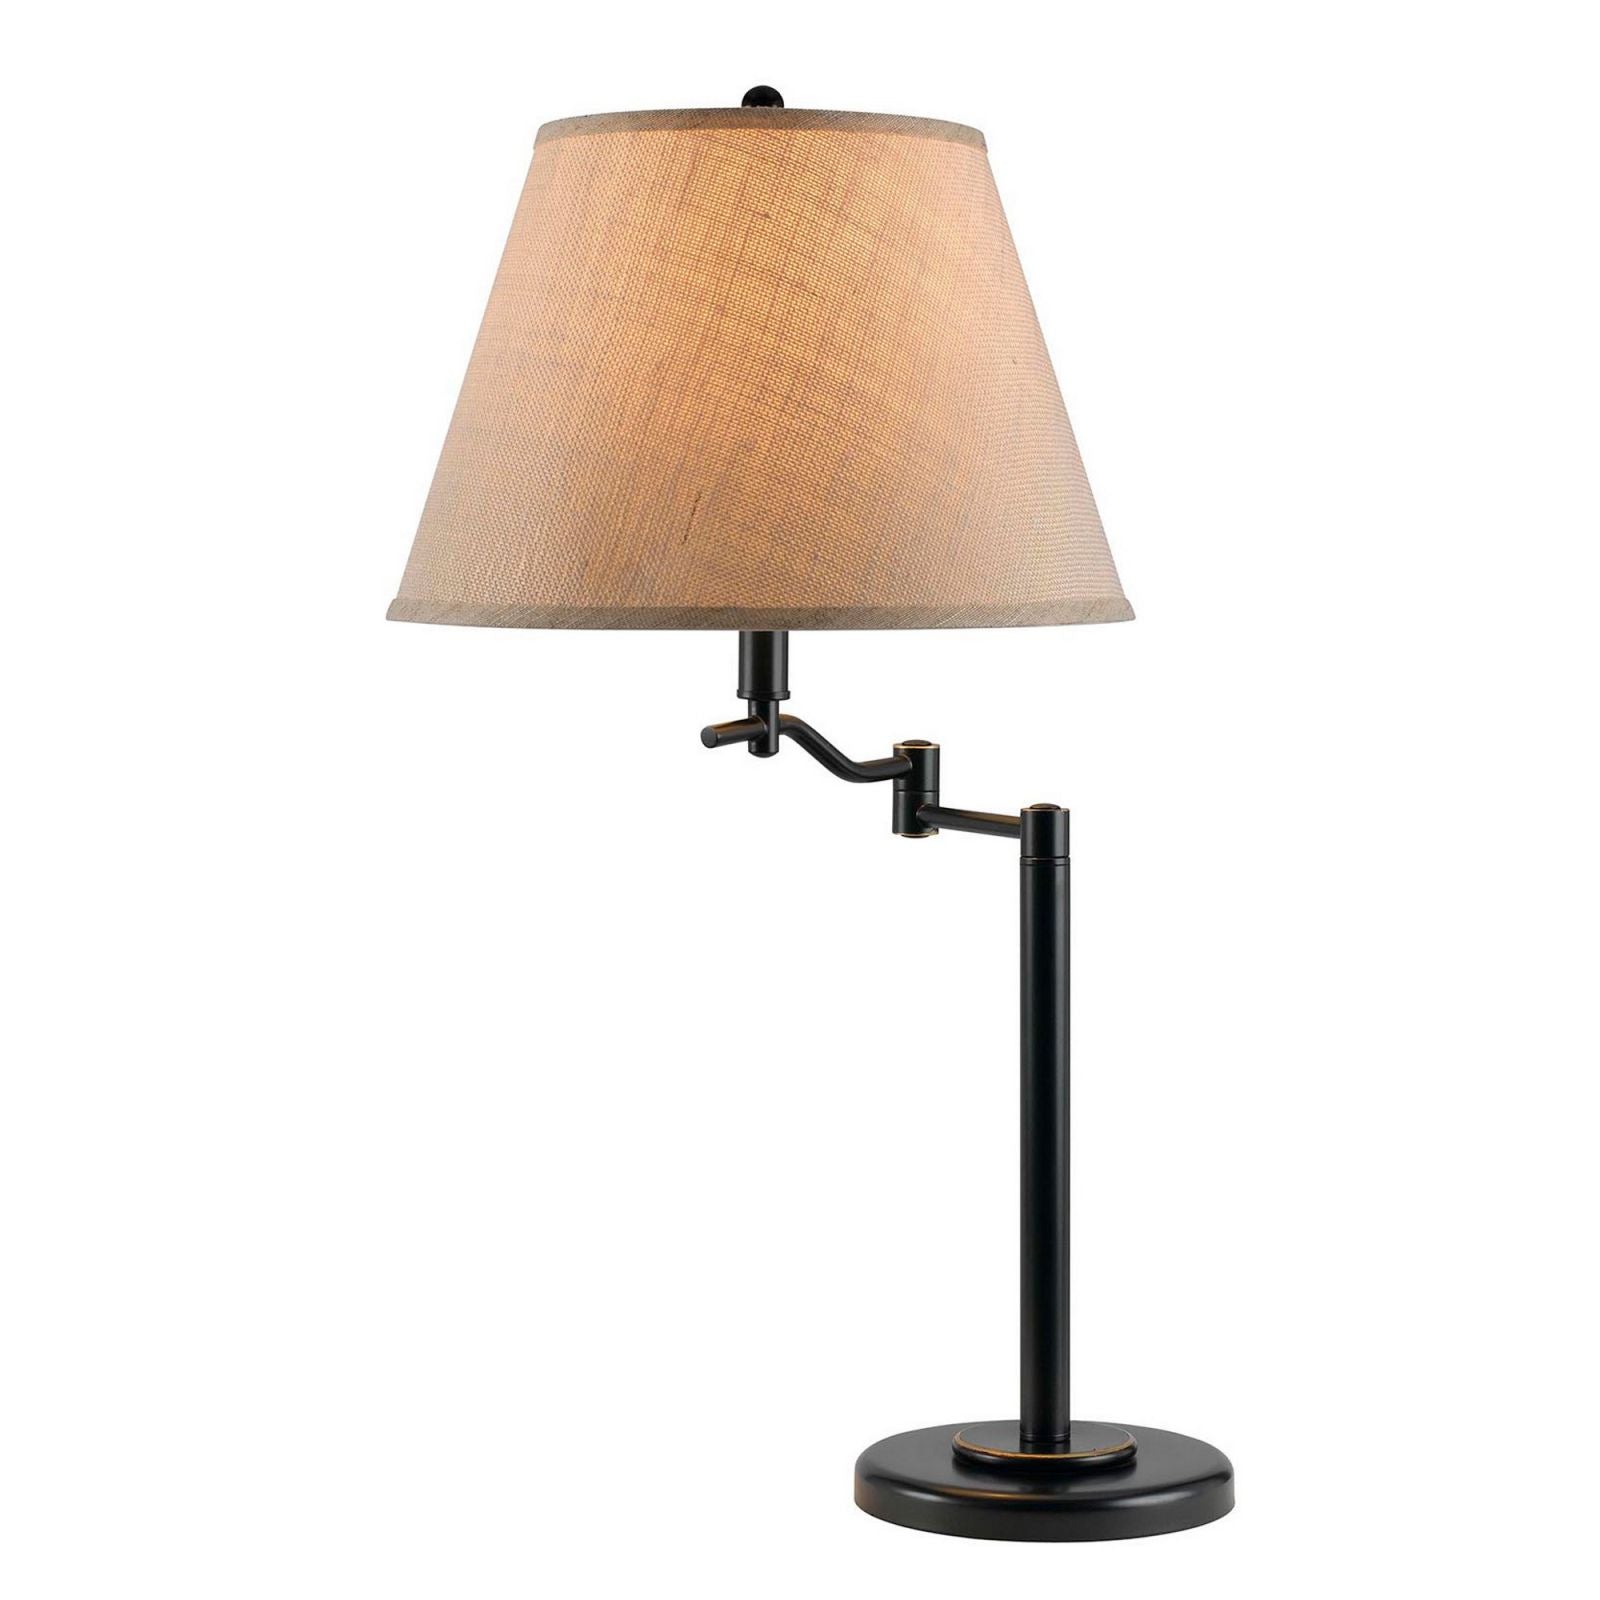 3 Way Metal Body Table Lamp With Swing Arm And Conical Fabric Shade, Black By Benzara